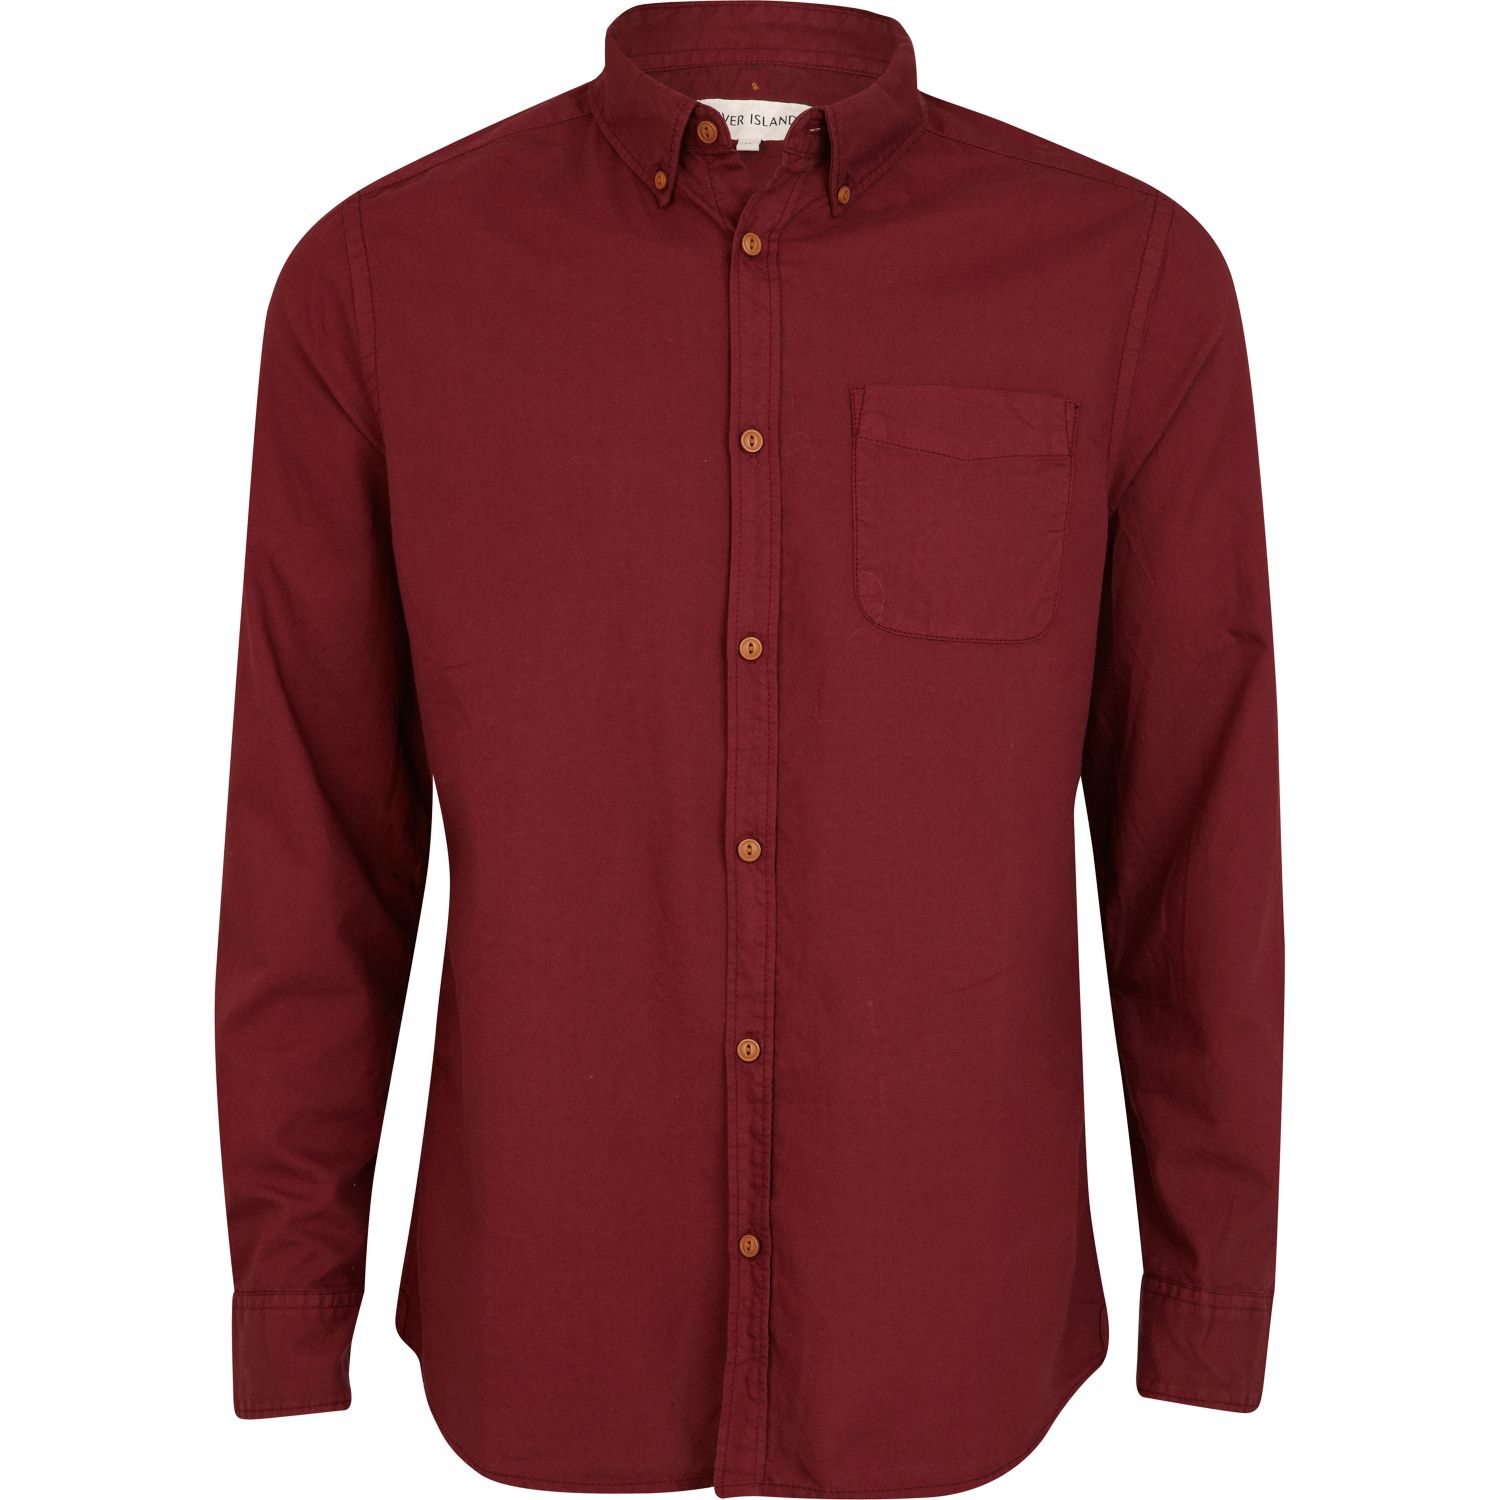 Lyst - River Island Dark Red Long Sleeve Oxford Shirt in Red for Men